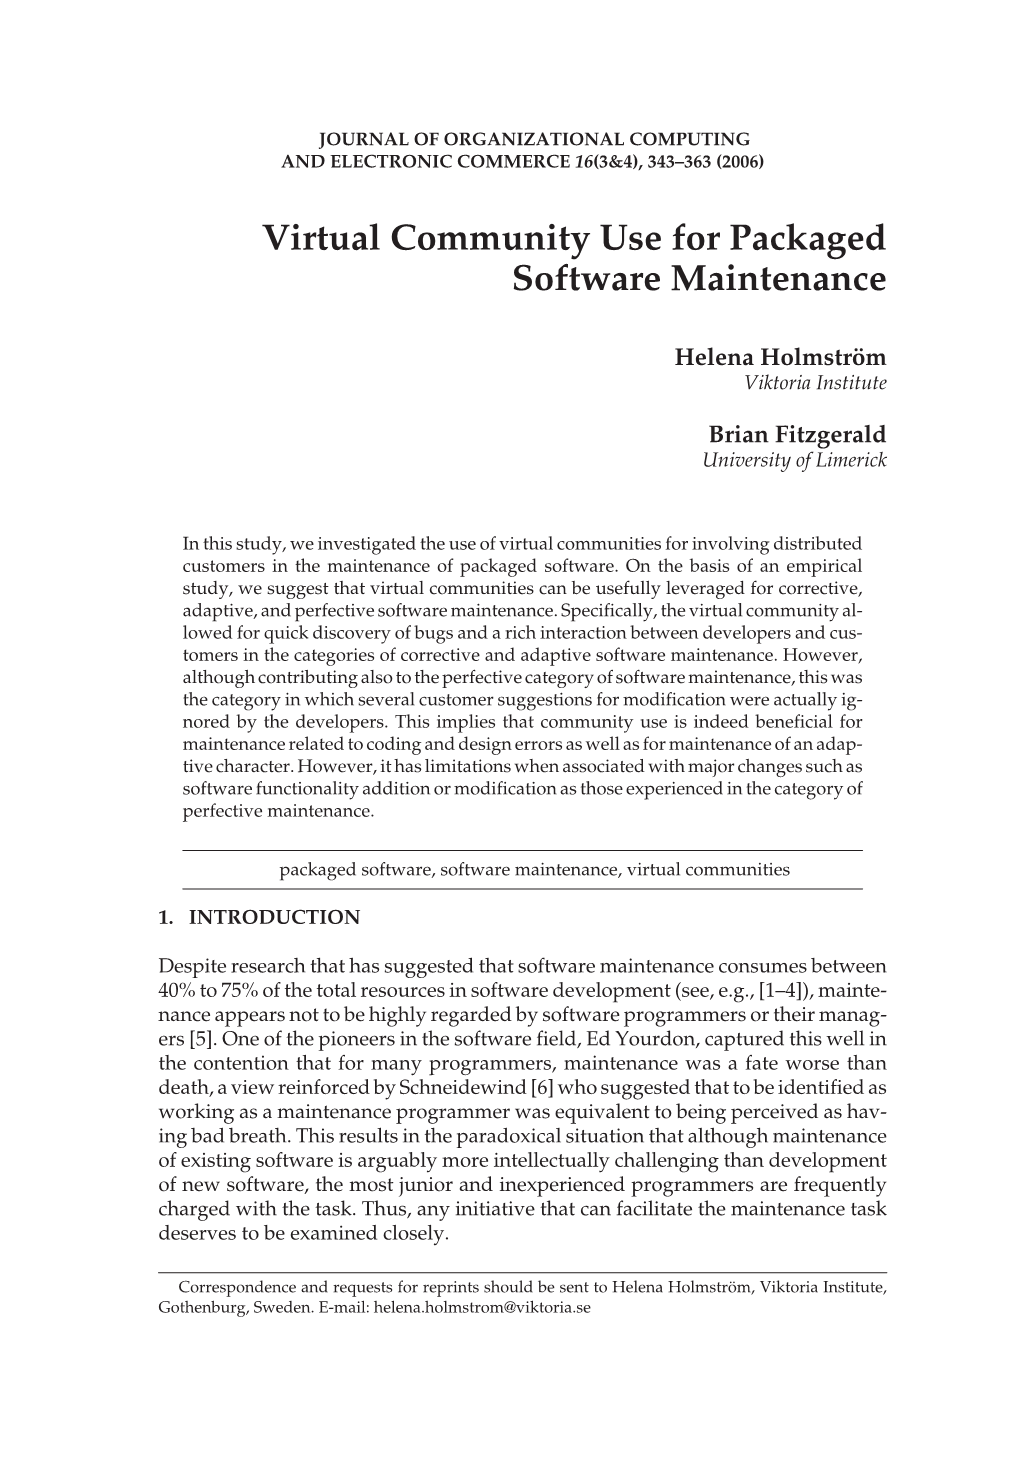 Virtual Community Use for Packaged Software Maintenance